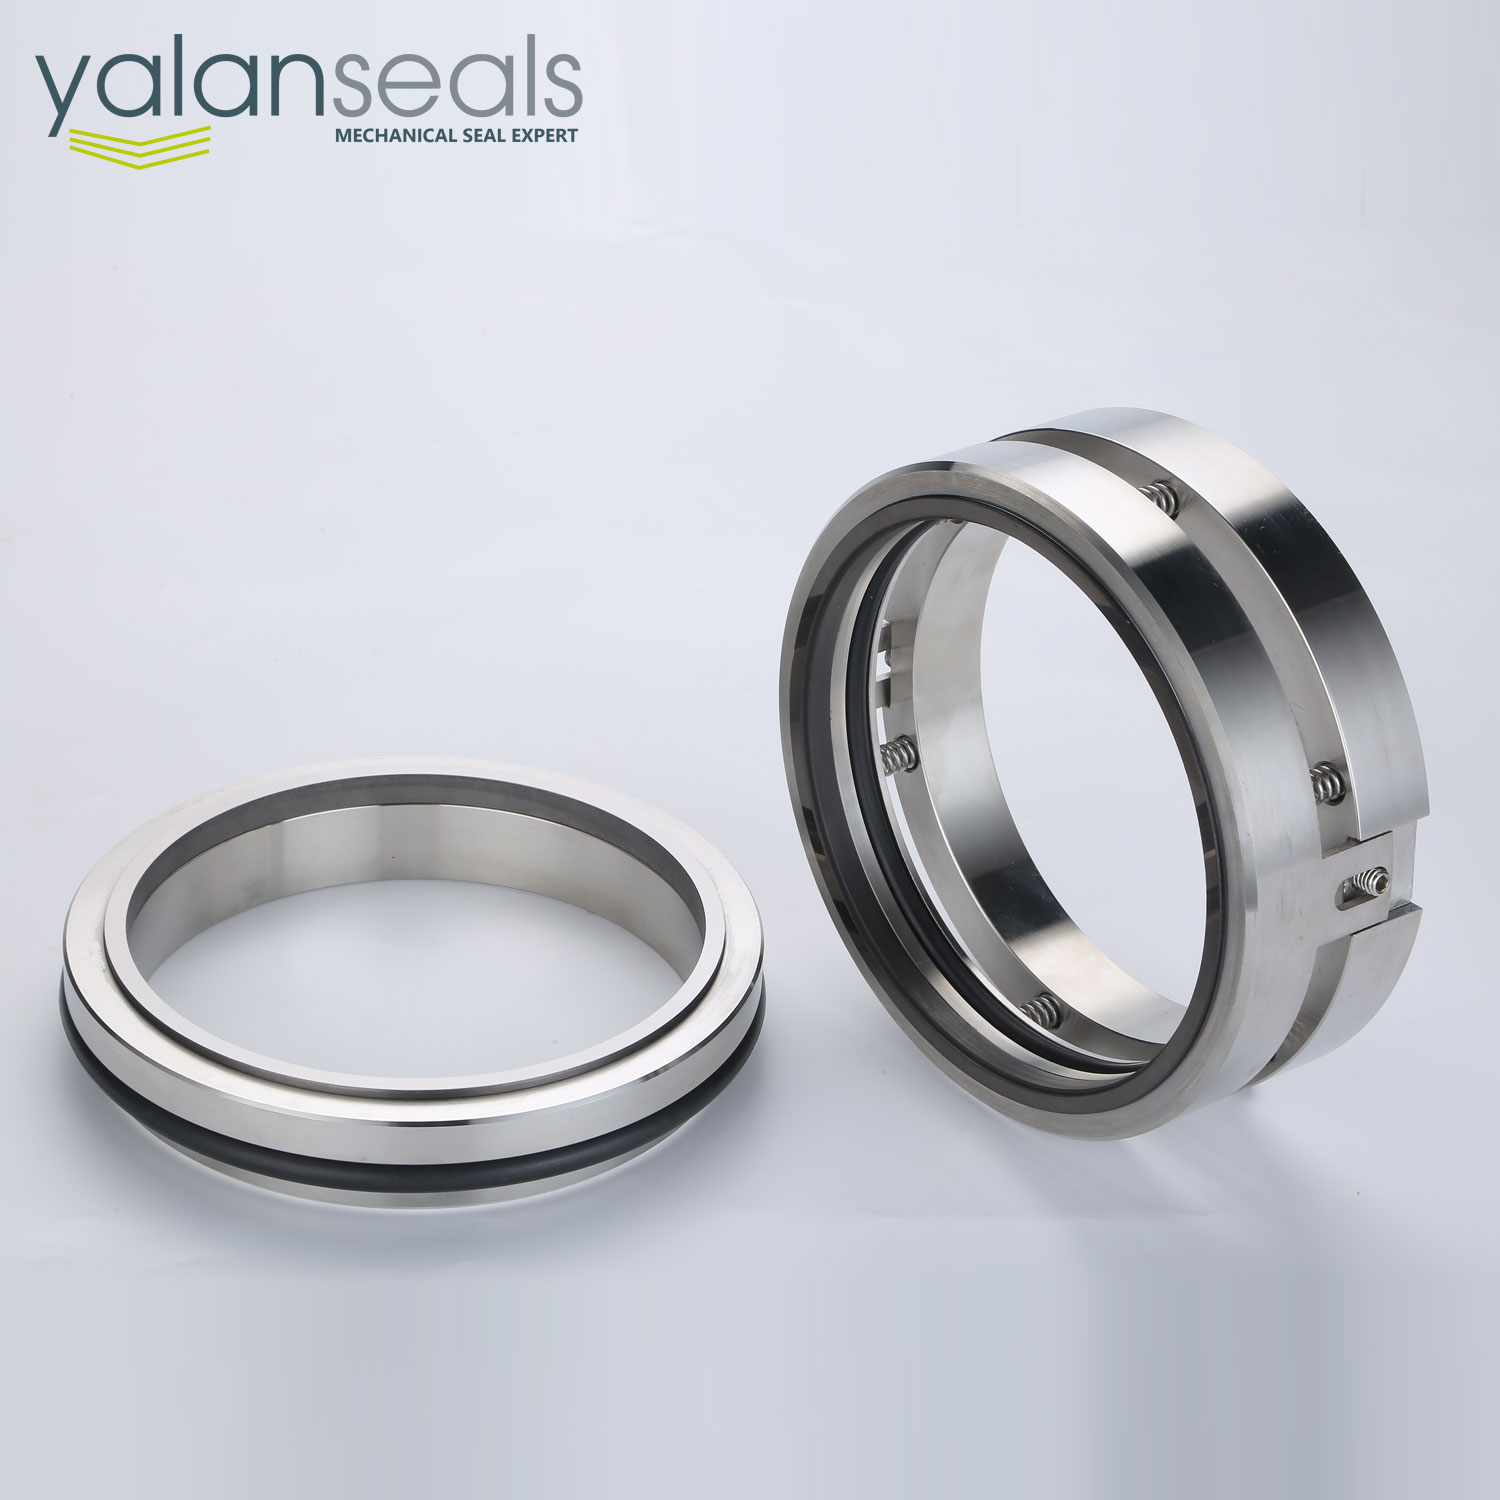 U46 Mechanical Seal for Reaction Kettles, Mixers, Paper Machine, Slurry Pumps and Axially Splitpumps